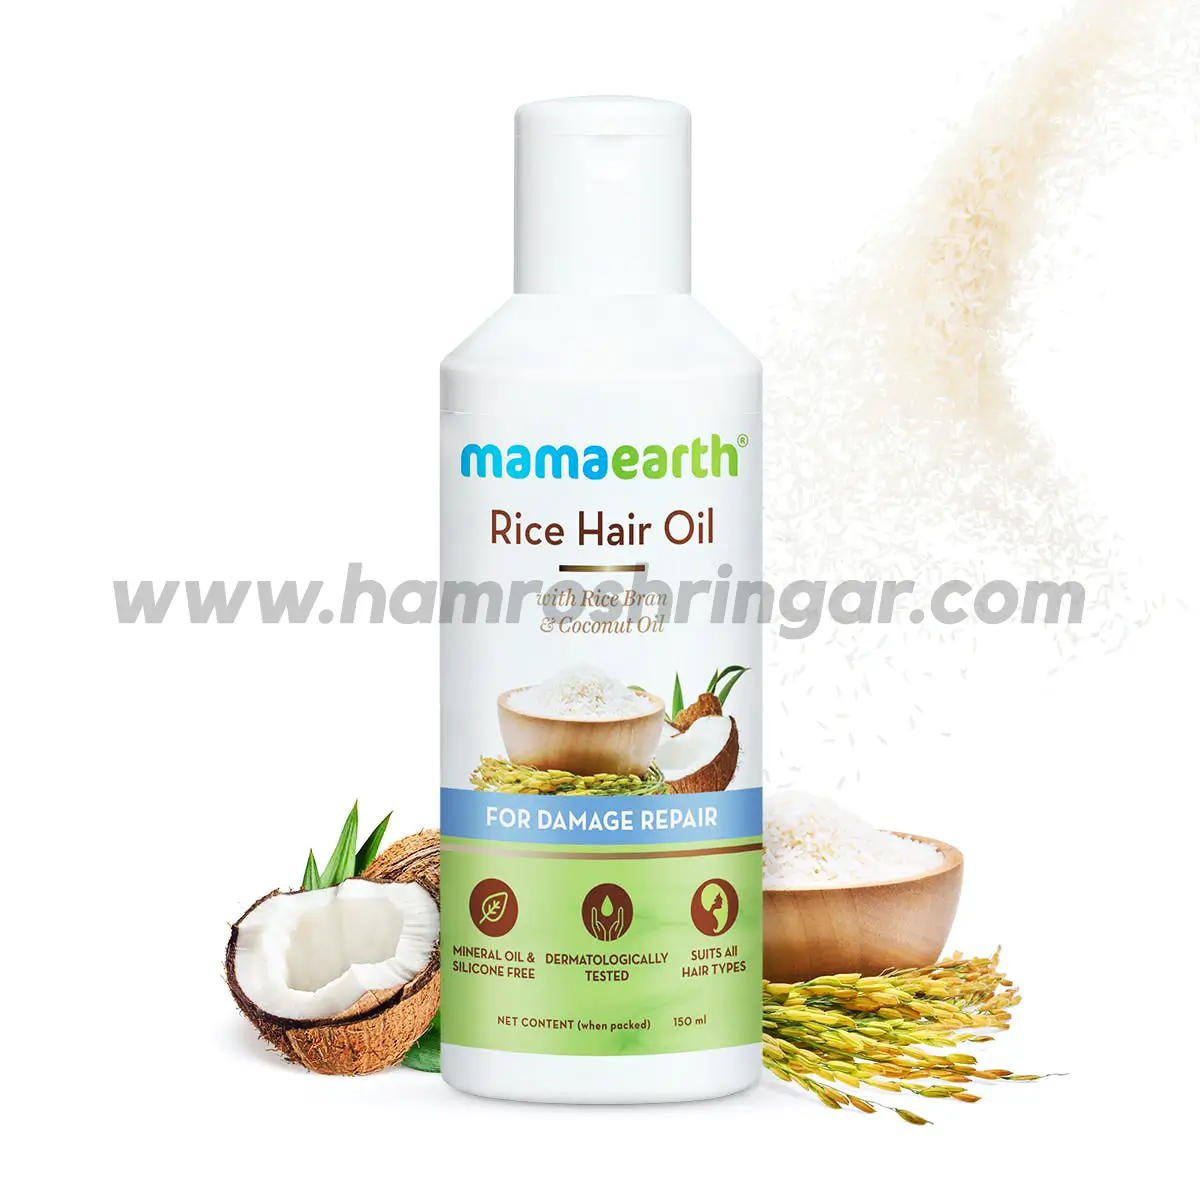 Mamaearth | Rice Hair Oil with Rice Bran & Coconut Oil for Damage Repair -  150 ml - Online Shopping in Nepal | Shringar Store | Shringar Shop |  Cosmetics Store | Cosmetics Shop | Online Store in Nepal